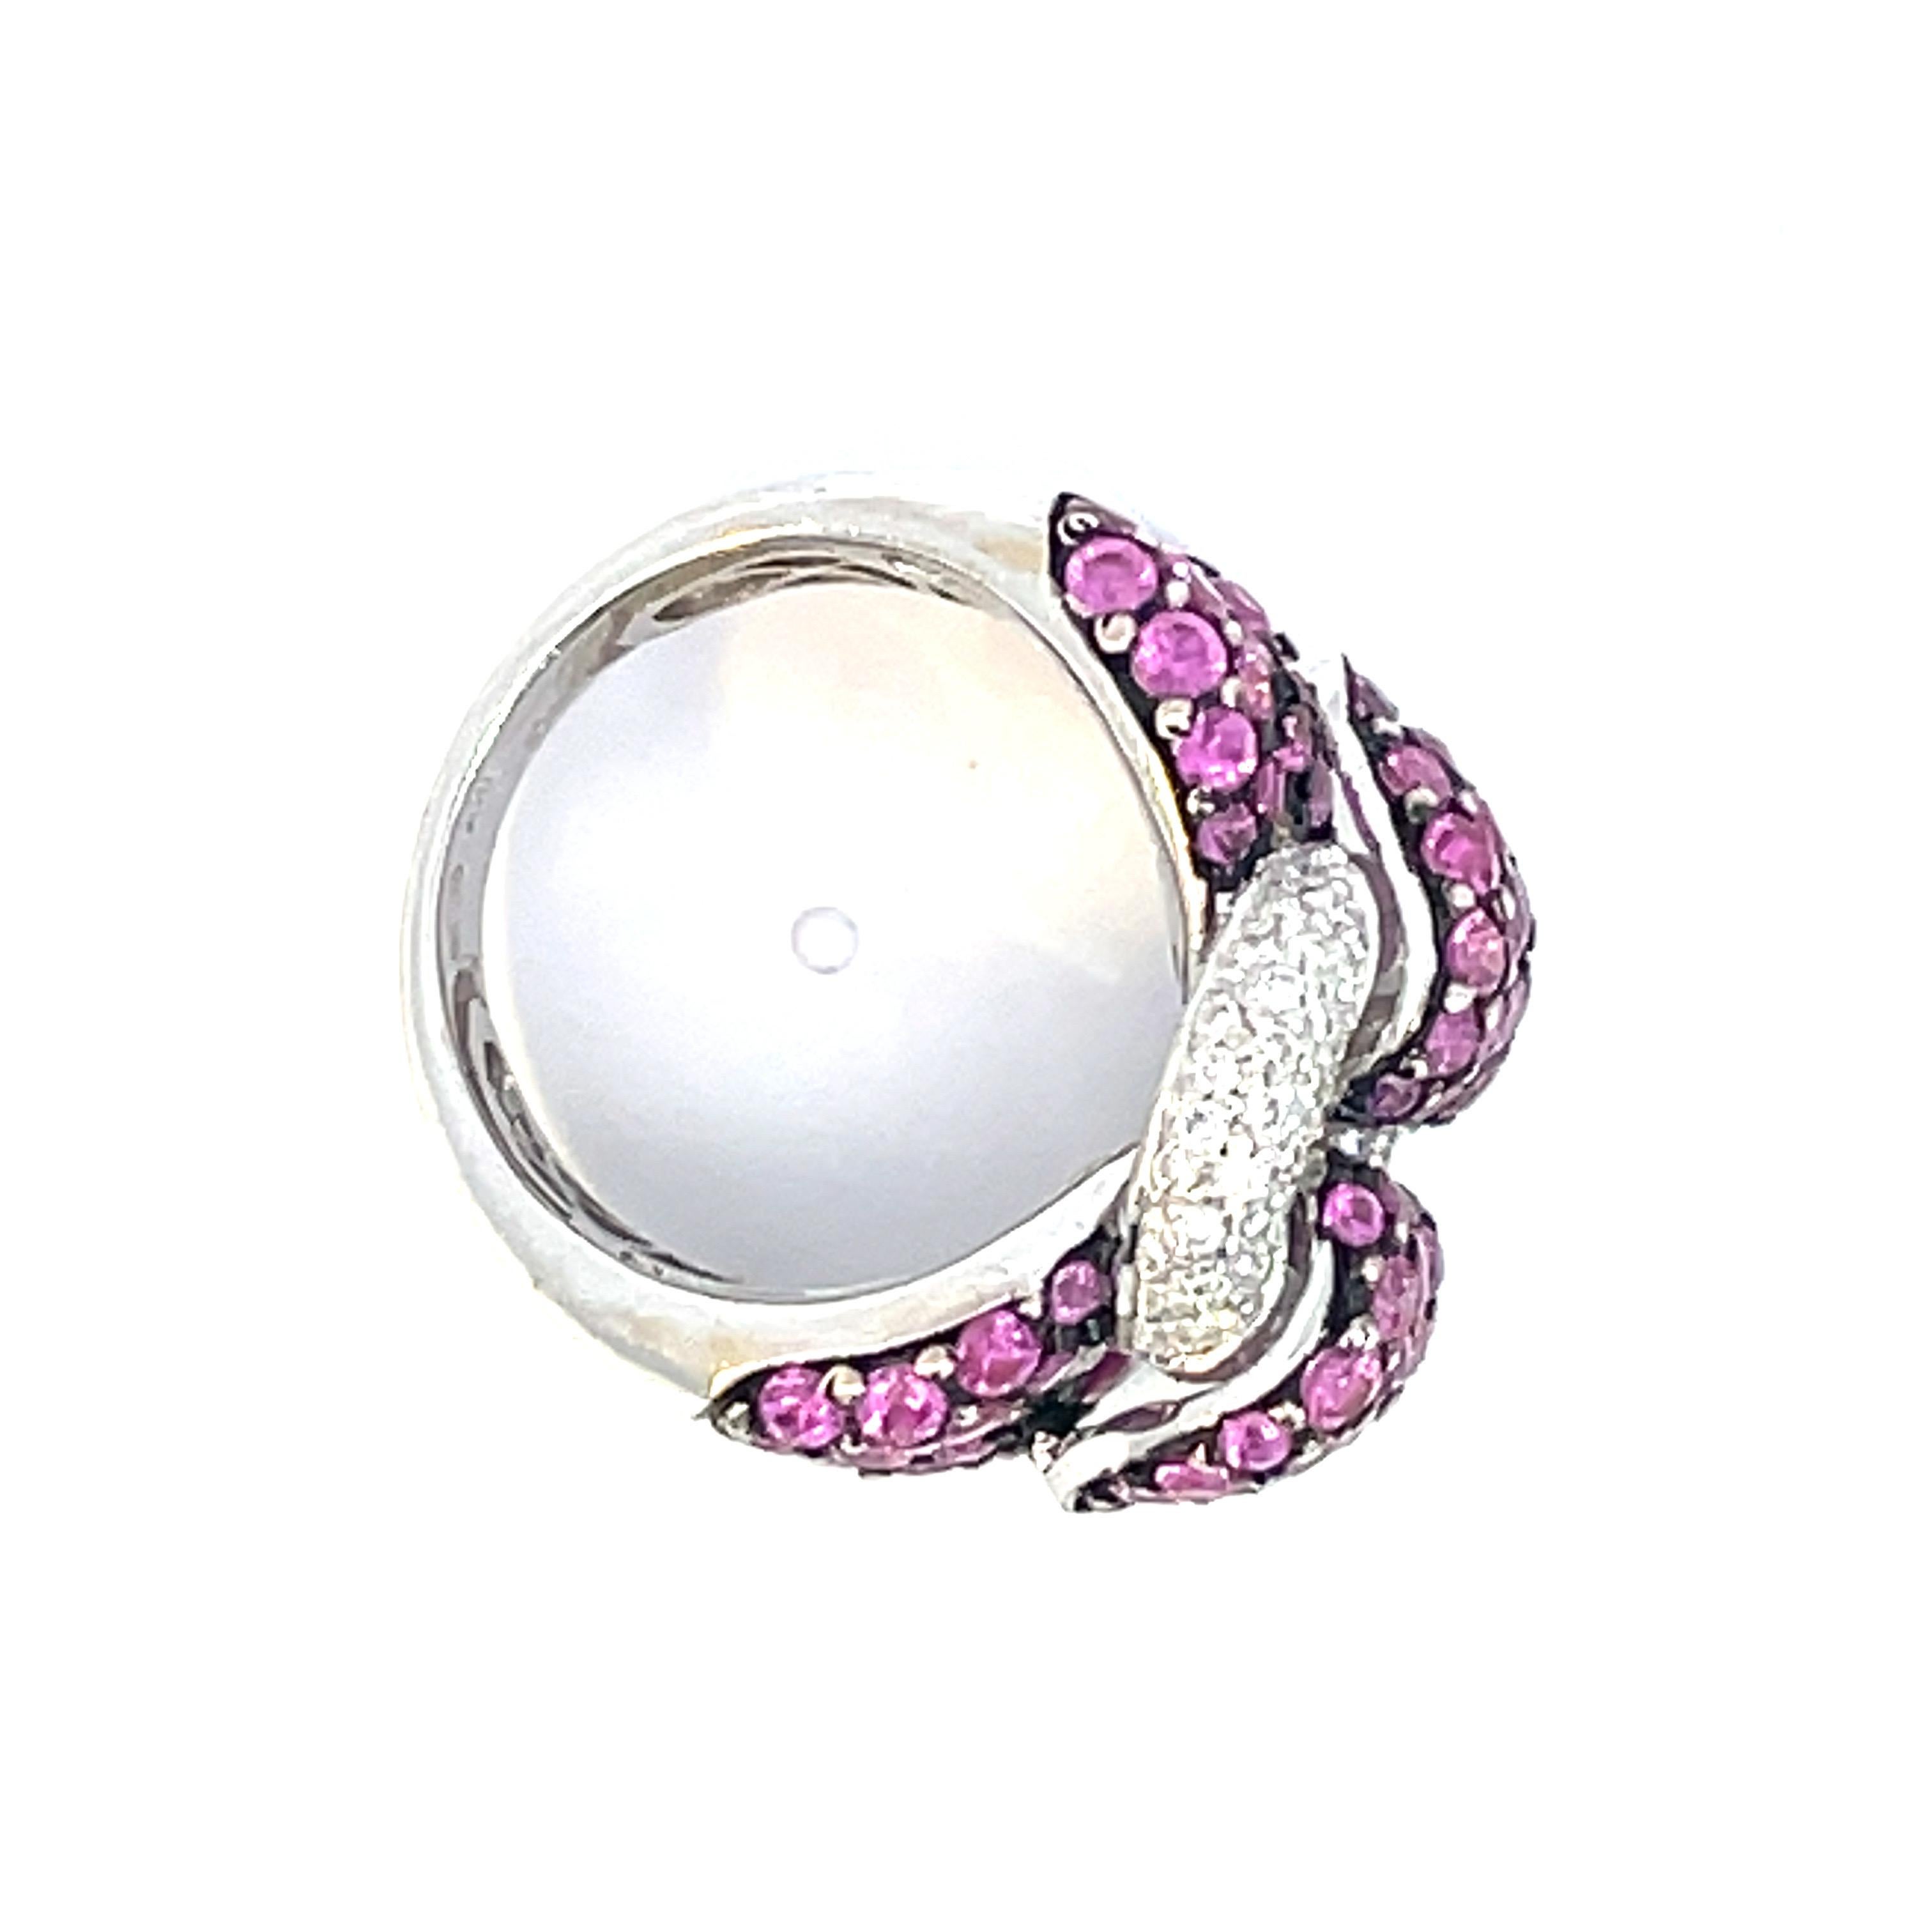 One natural pink sapphire  & natural white diamond Ribbon Ring meticulously set with fine pink sapphires accented by a black rhodium finish to bring out the colour and only the finest quality brilliant cut diamonds. The best accessory to make any